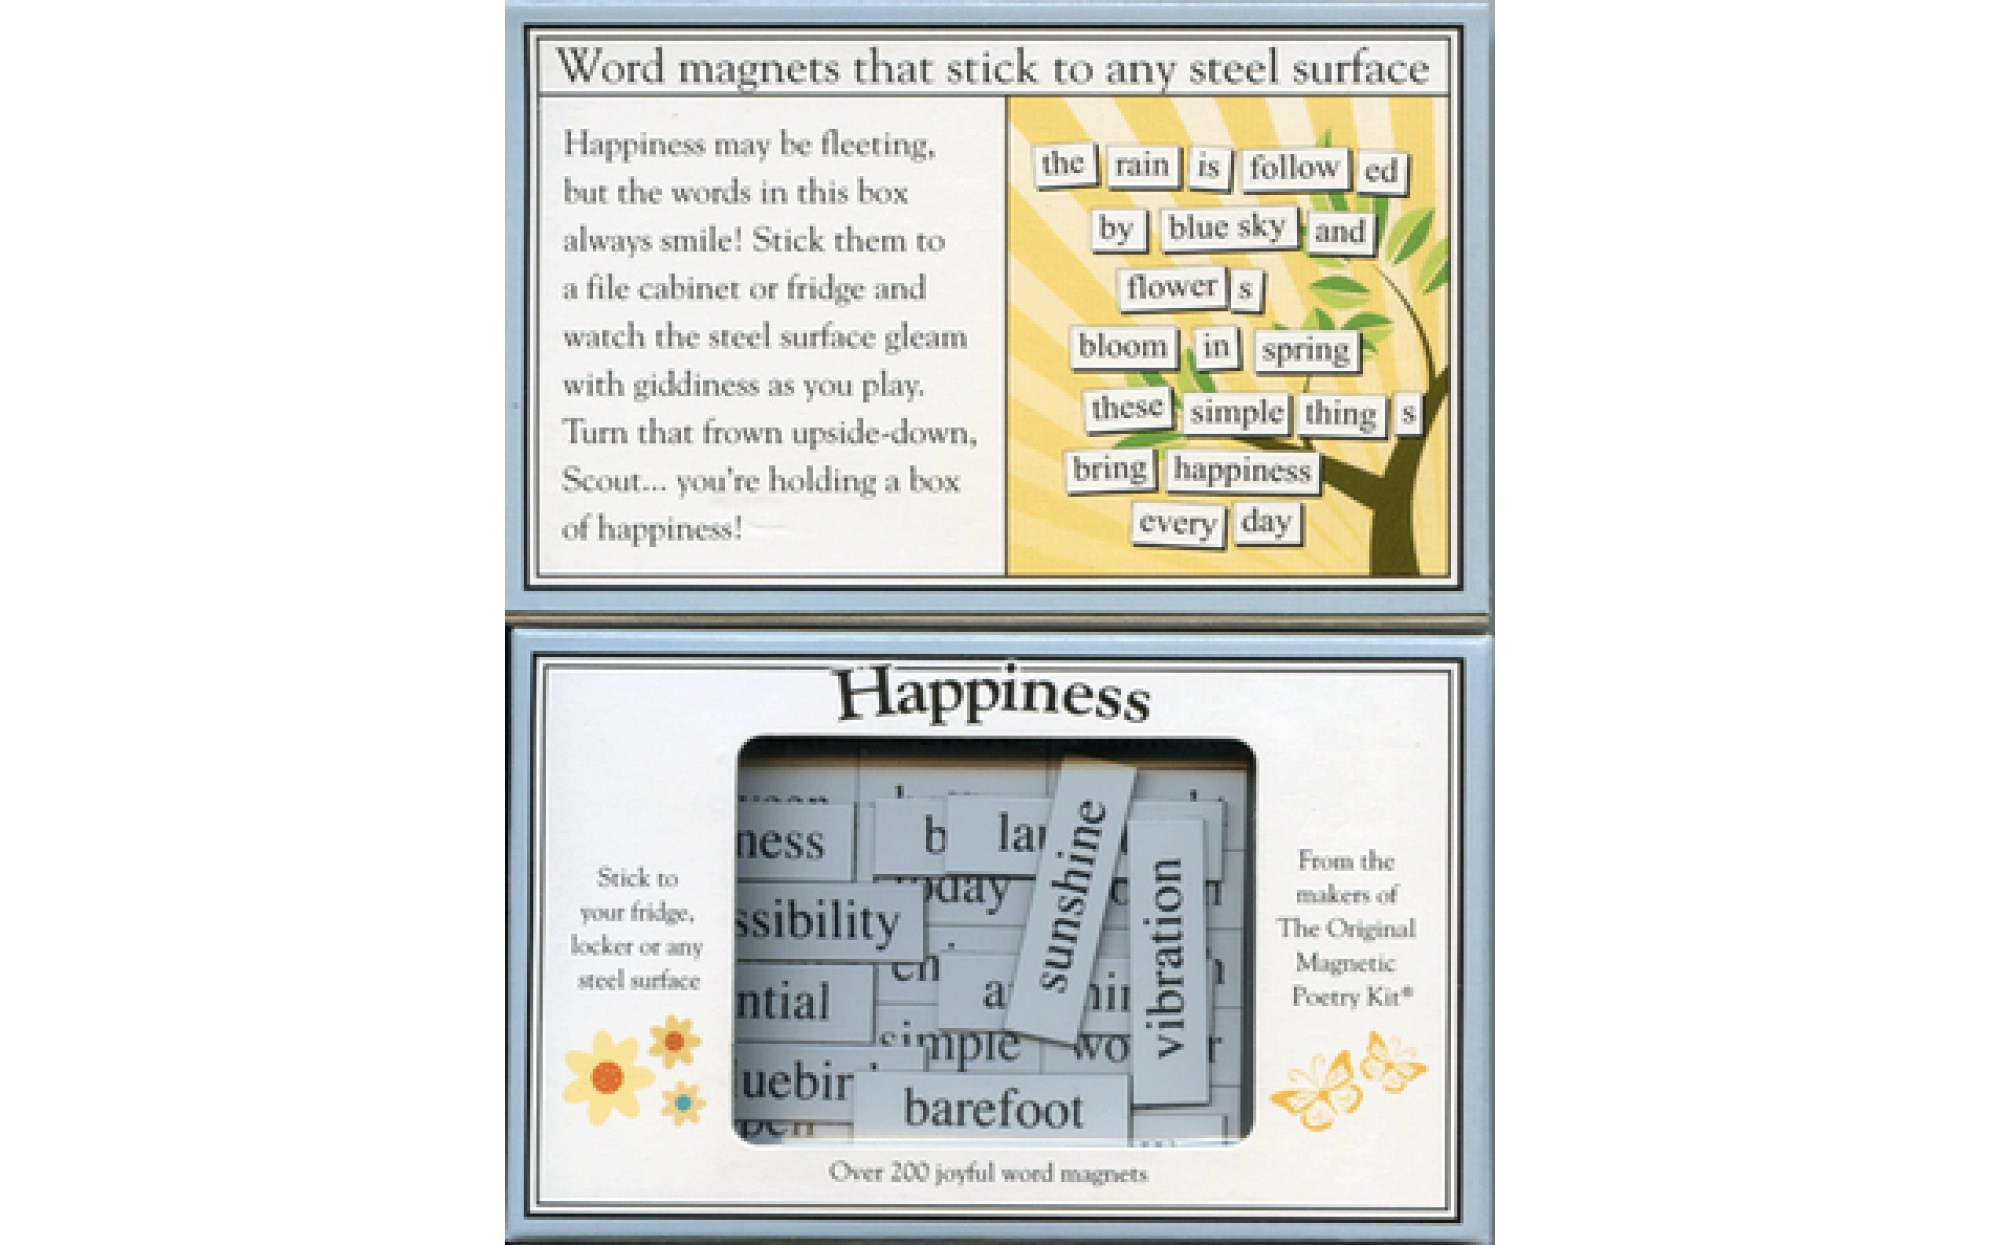 Magnetic Poetry Kit HEALING WORDS Made in USA 200 Word Magnets 